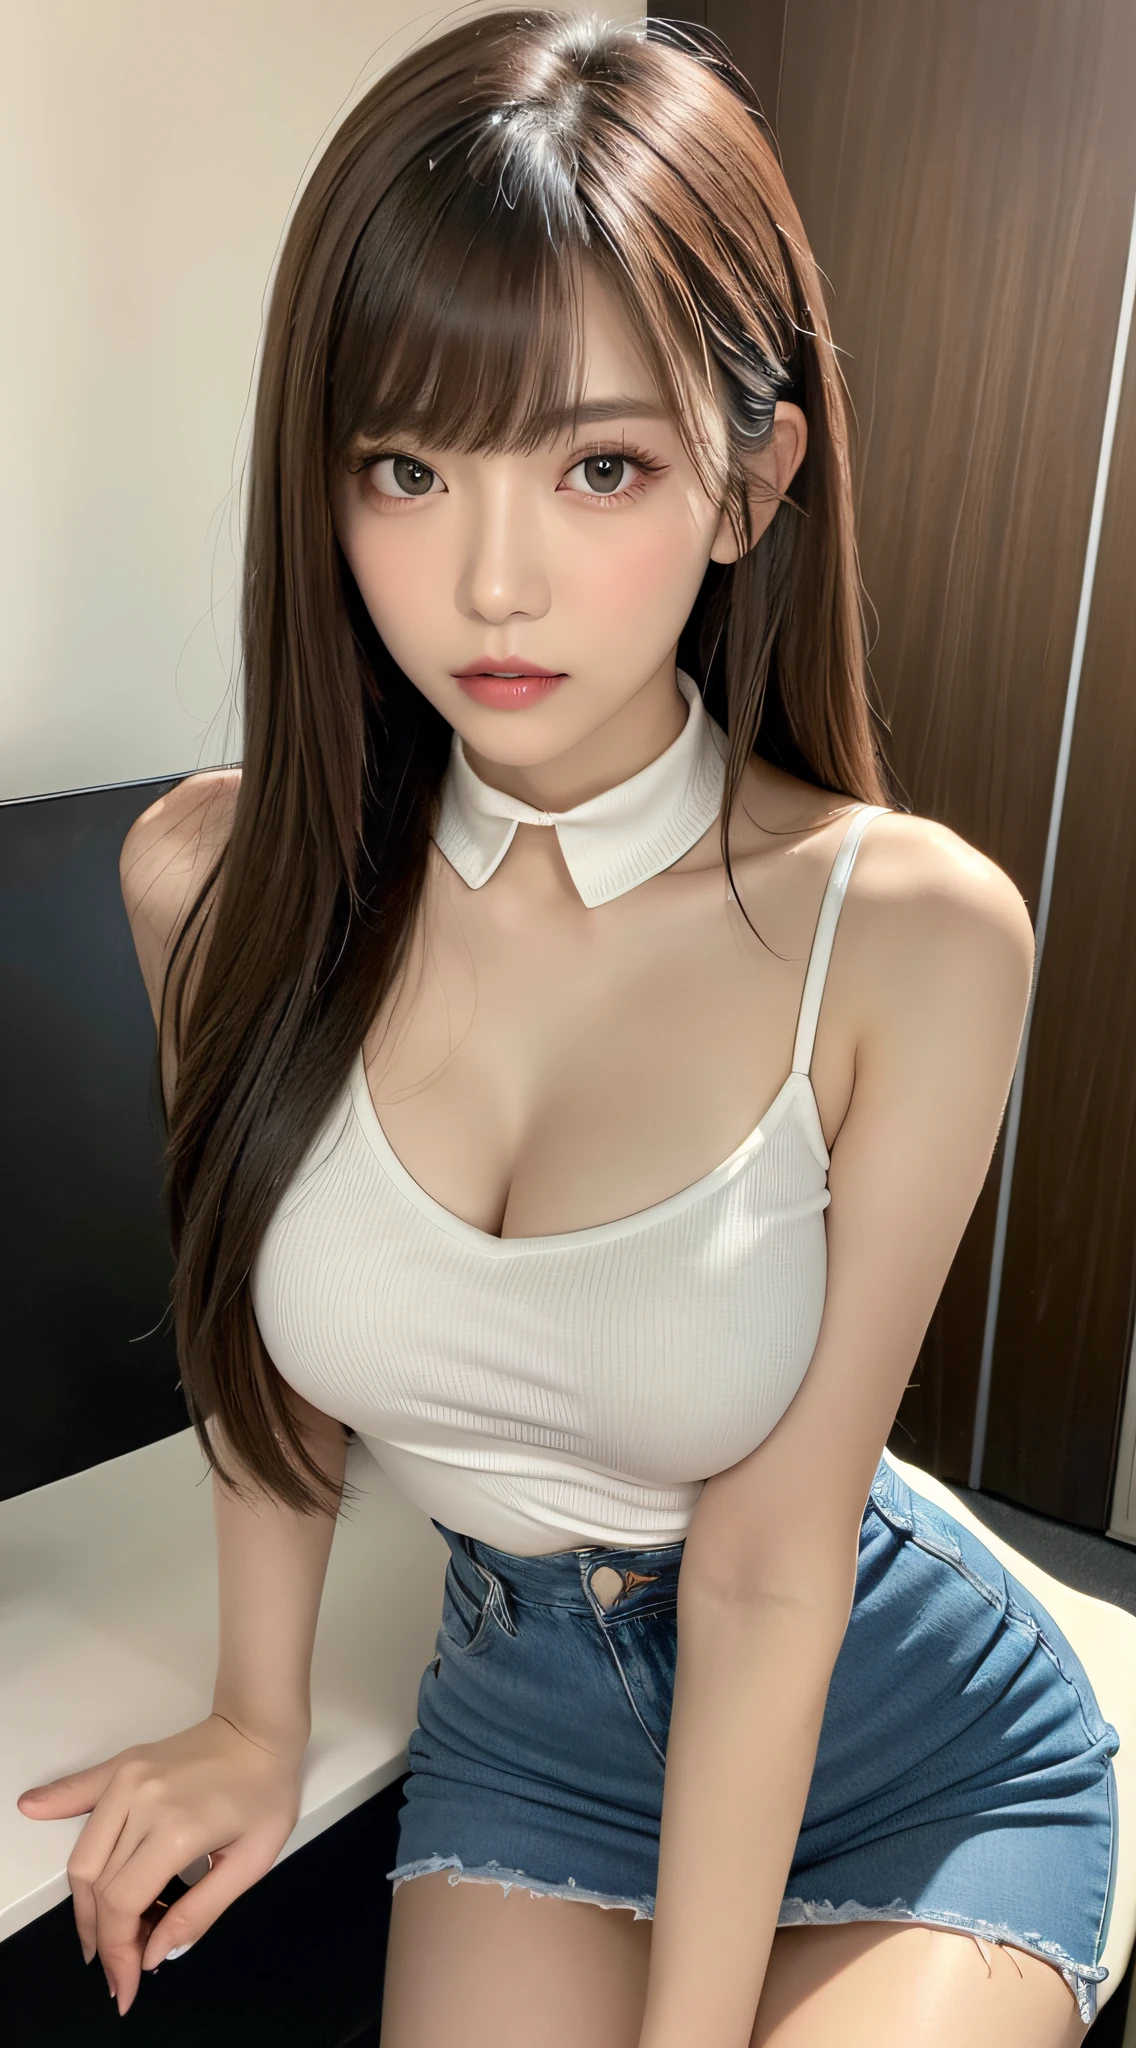 (Best Quality, 8K, masutepiece, Ultra HD: 1.3), 1girl in,  ,light brown hair, Blunt bangs, hair behind ear, hair over shoulder, Long hair,  slender body shape, Ultra Fine Face, Delicate lips, Beautiful eyes, Double eyelids, lipsticks, thin blush ,Green eyes ,perfect glossy skin,flawless skin,fair white skin,perspiring,A gaze that invites you, chest,Ultra-thin hands, Ultra-fine fingers, shirt with collar, tight skirts , beauty legs ,pumps. s Office